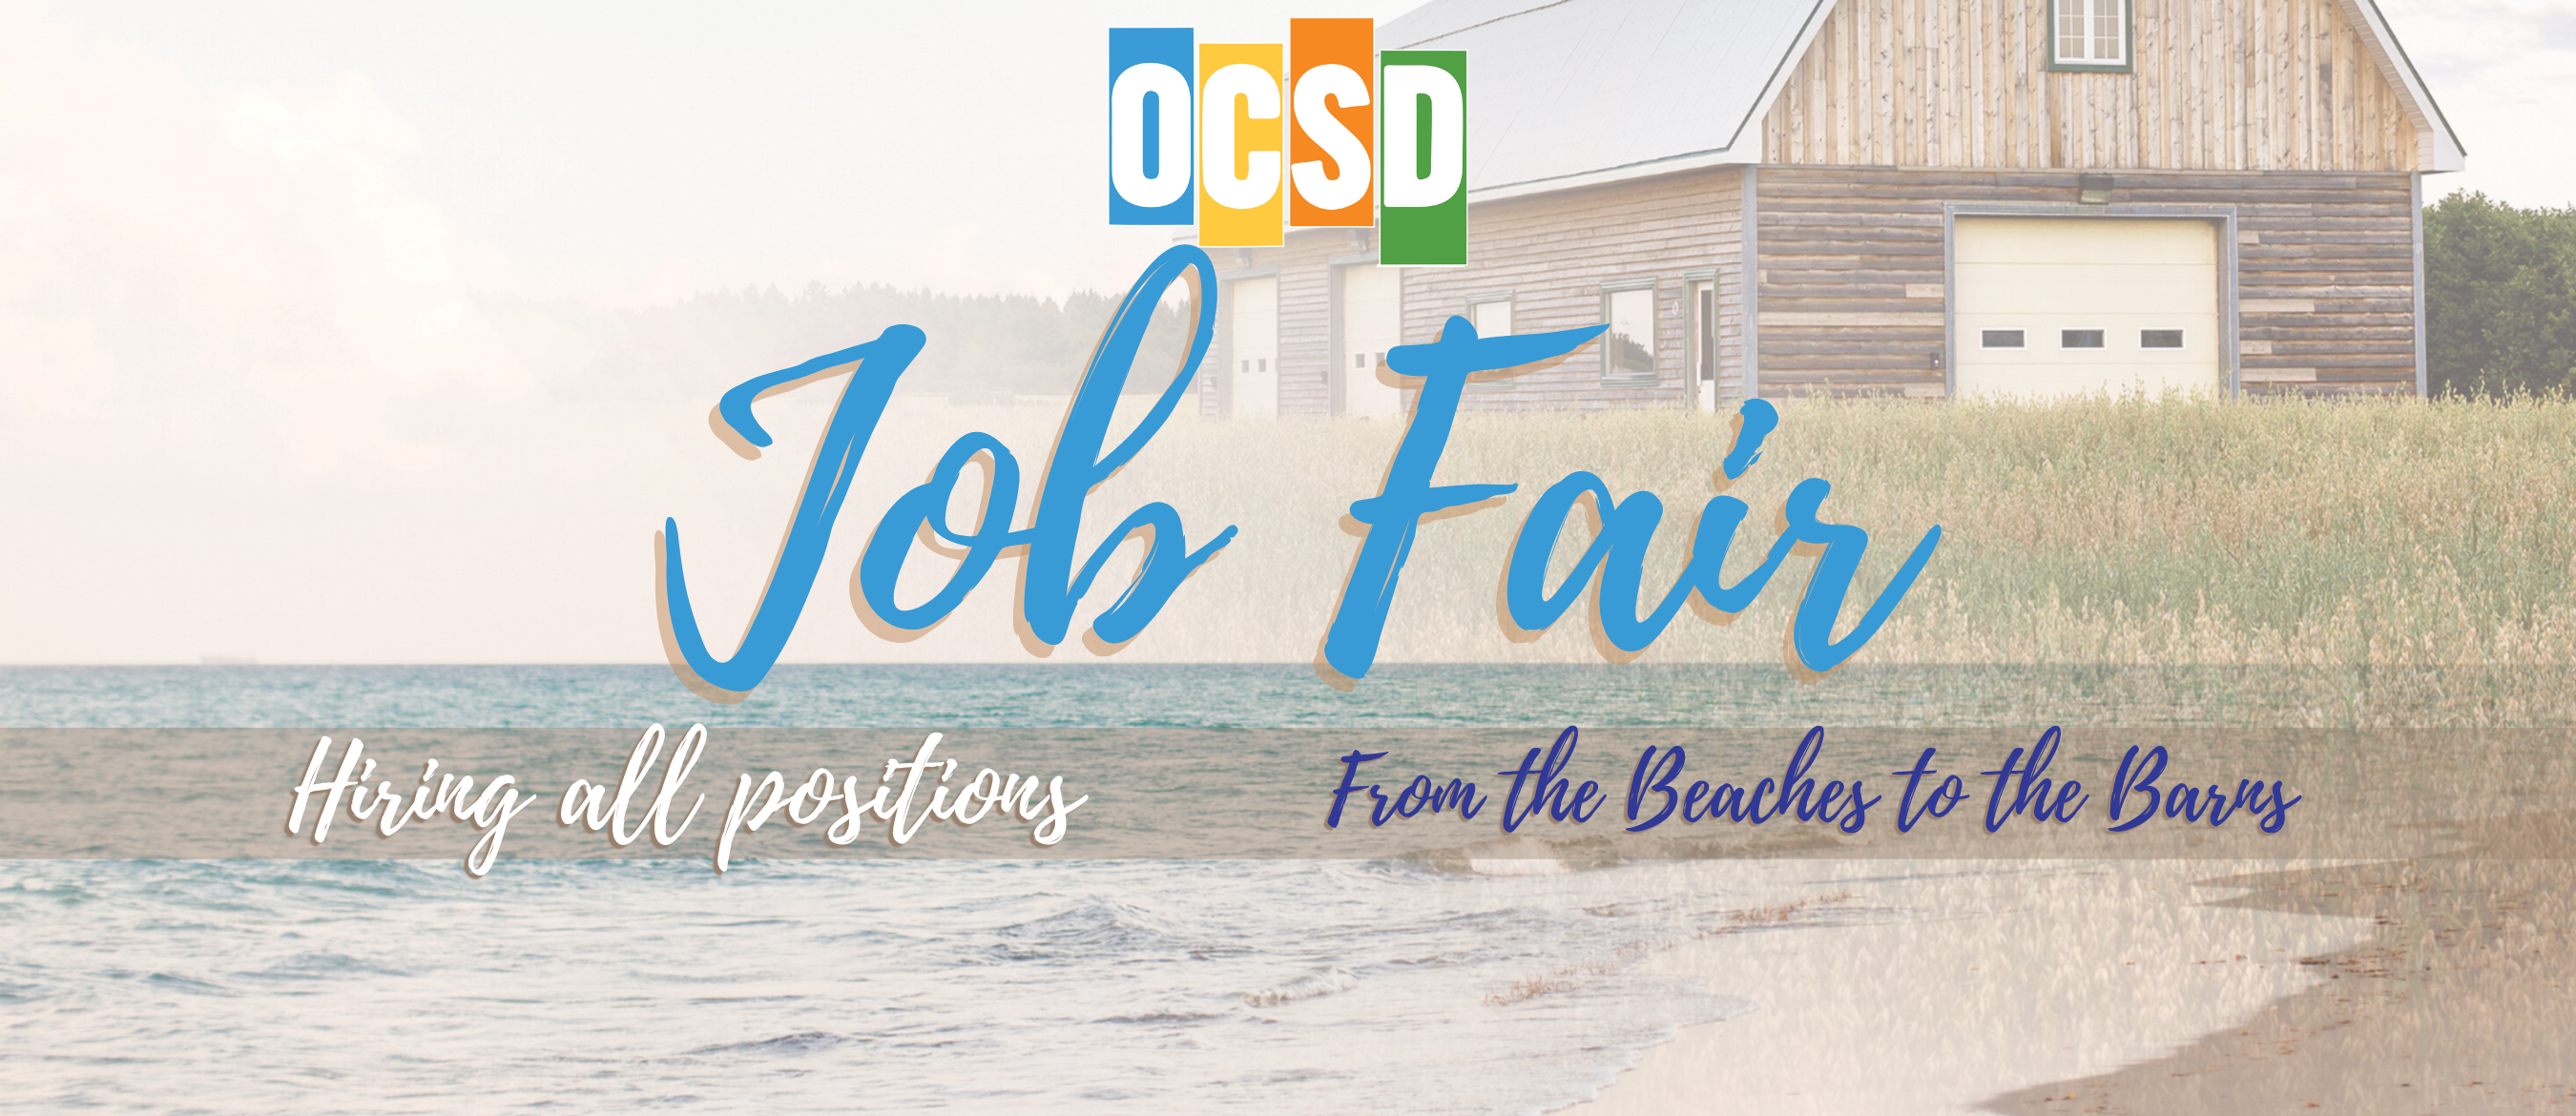 Job Fair Hiring all positions From the Beaches to the Barns